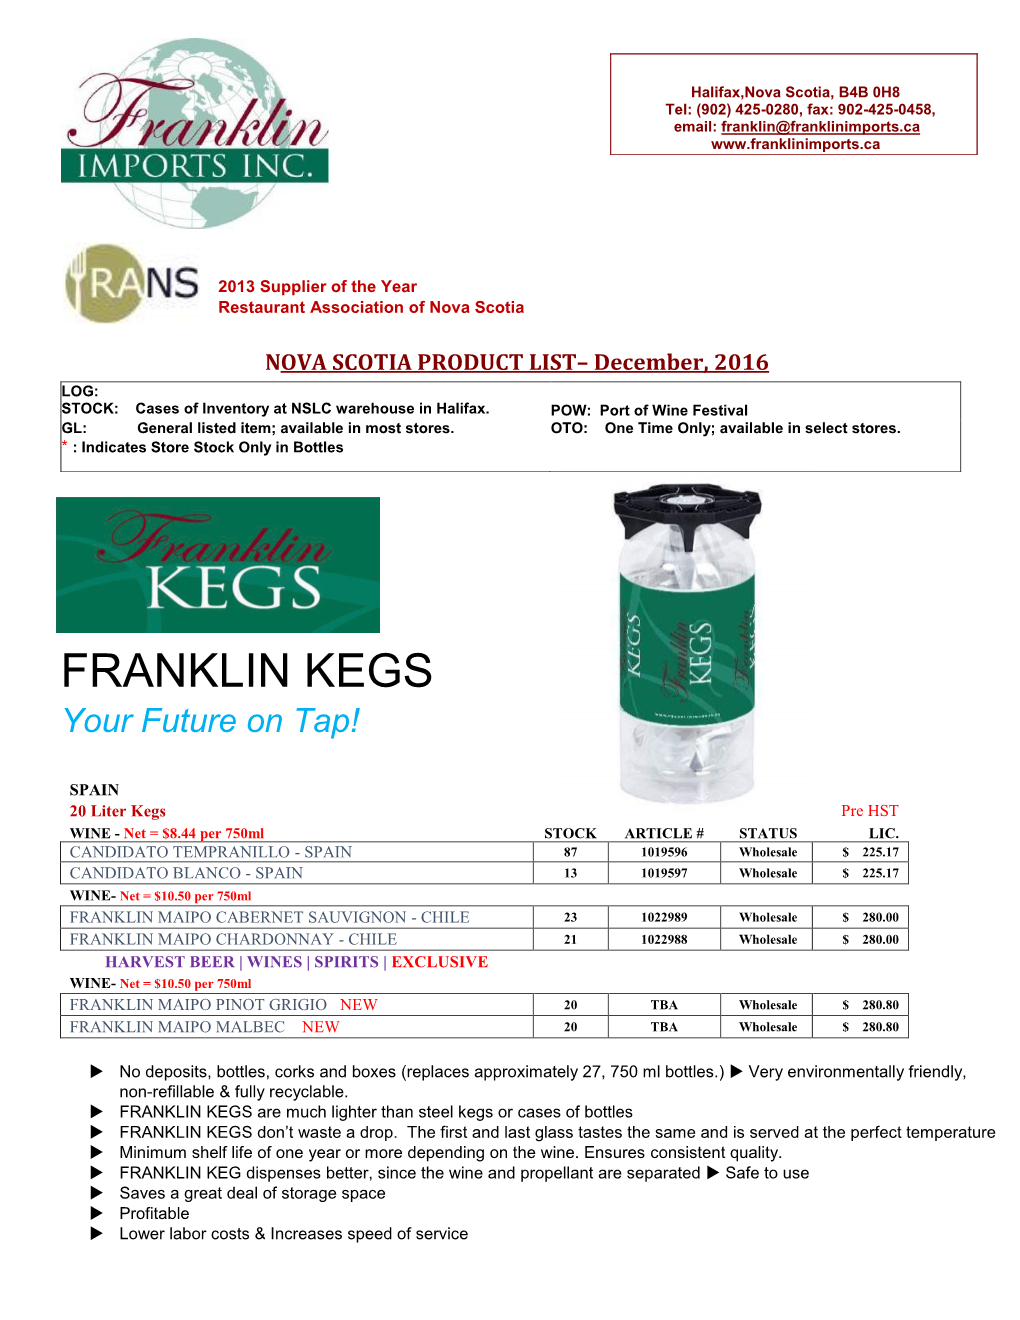 FRANKLIN KEGS Your Future on Tap!